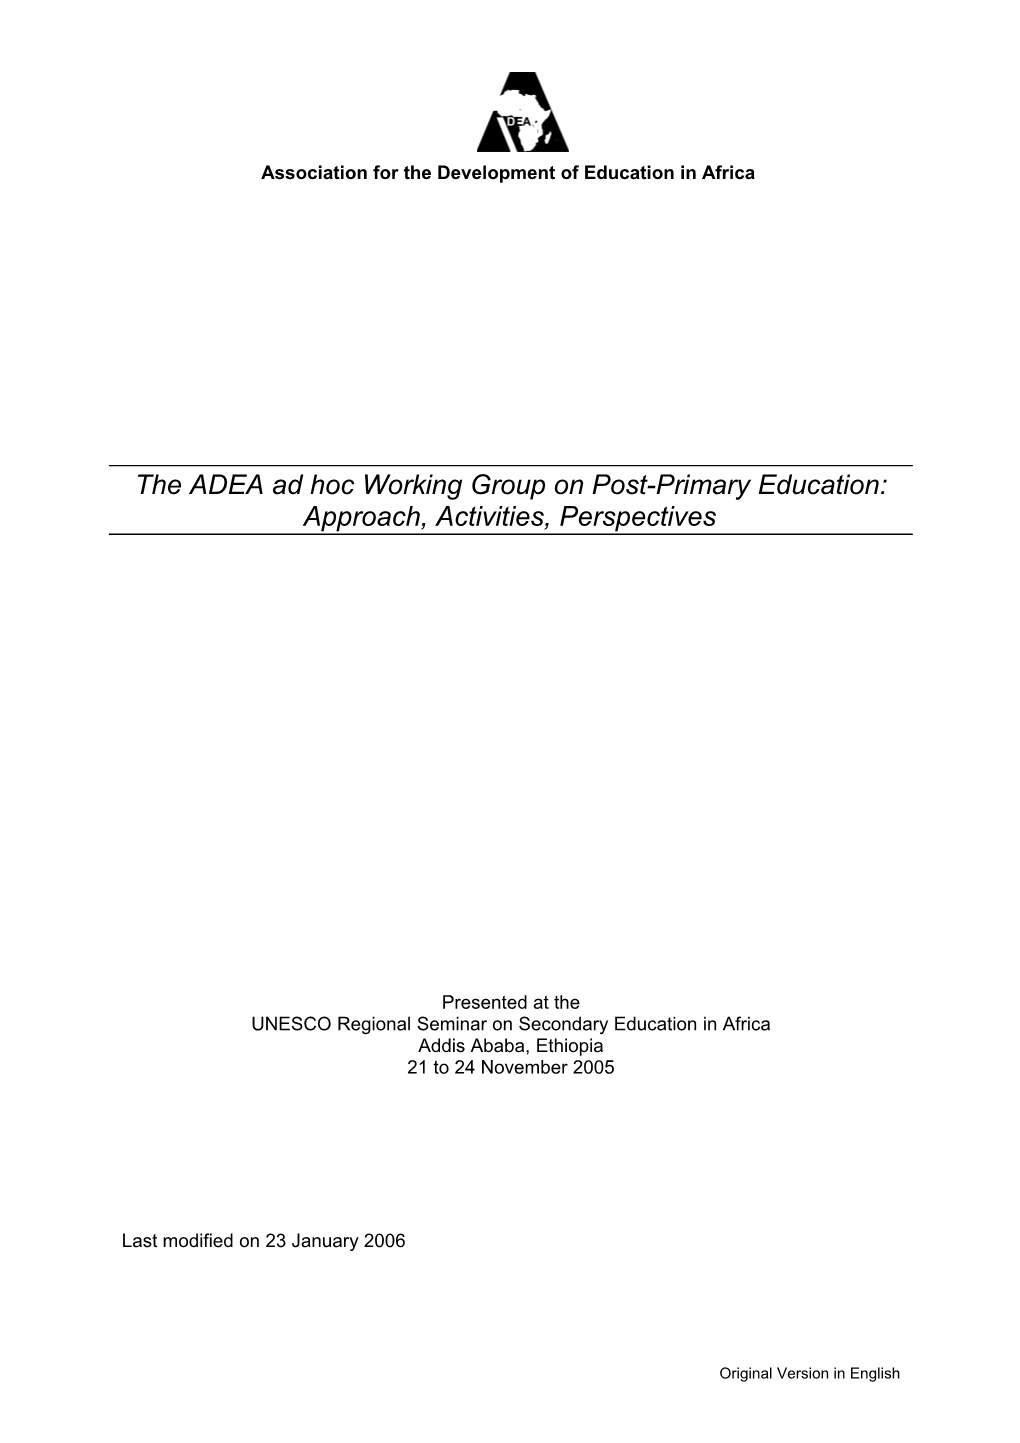 The ADEA Ad Hoc Working Group on Post-Primary Education